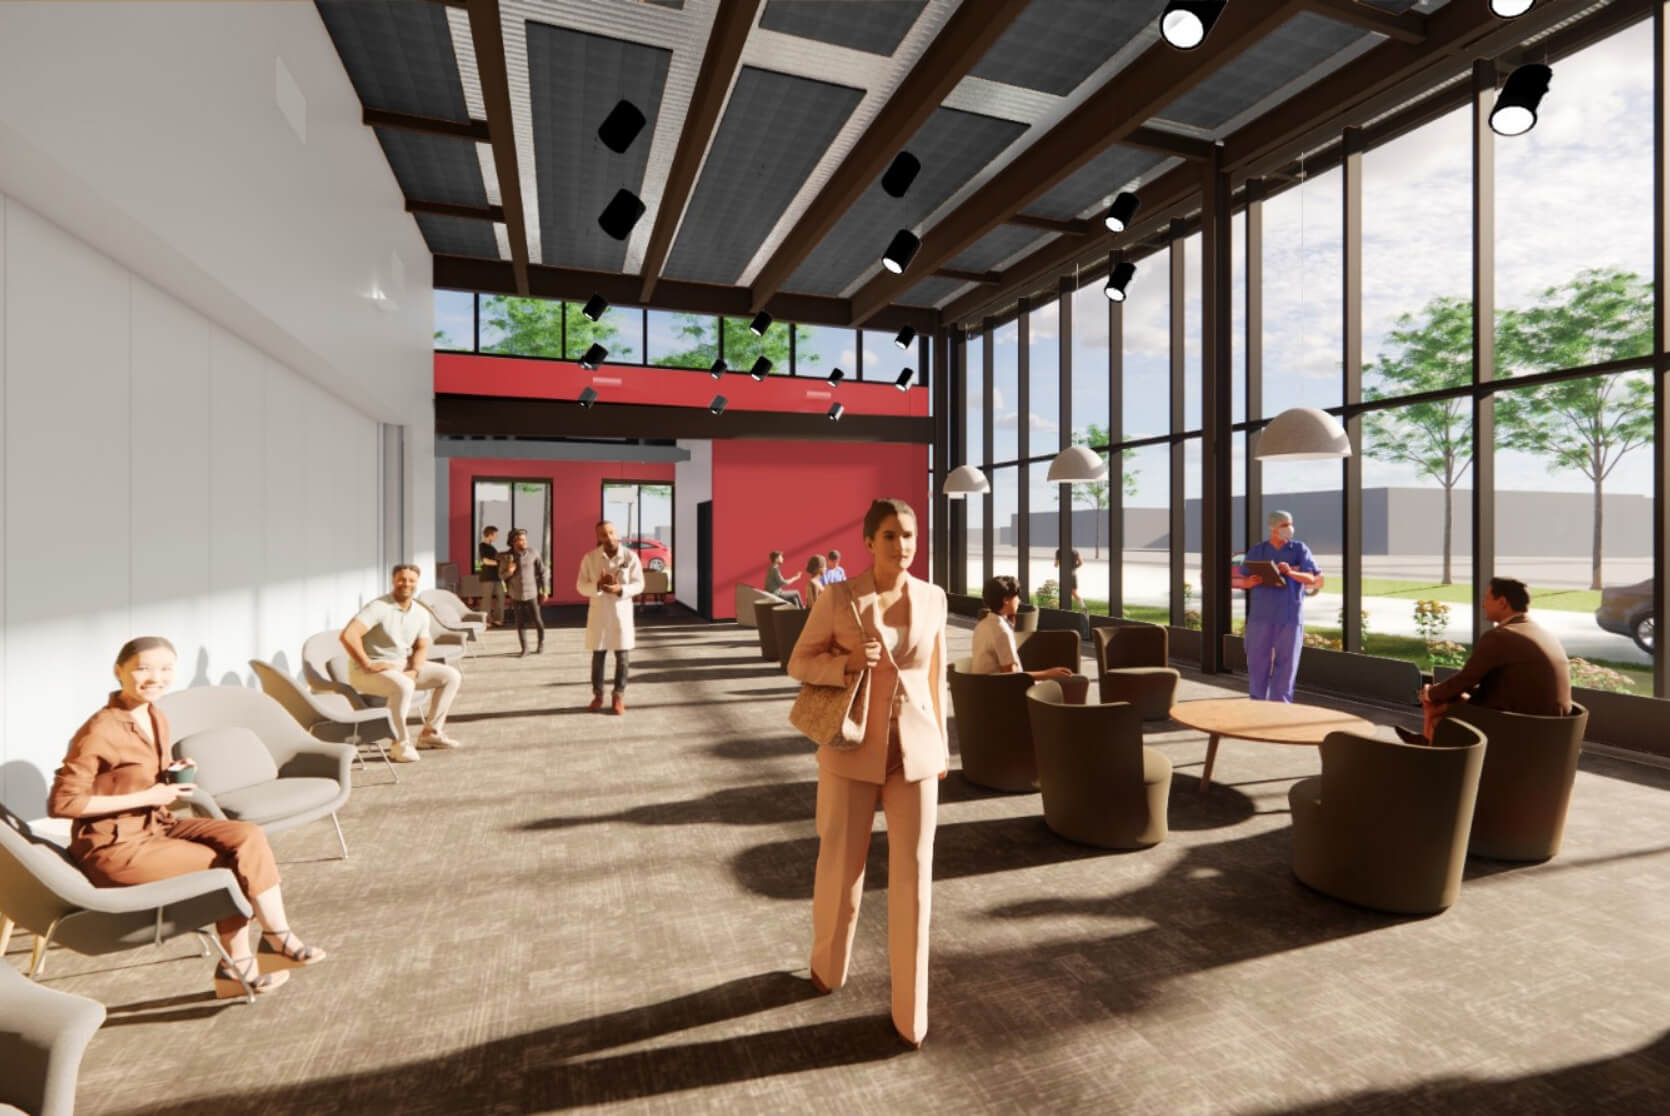 An artist rendering of the interior of the Mennonite College of Nursing Simulation Center building